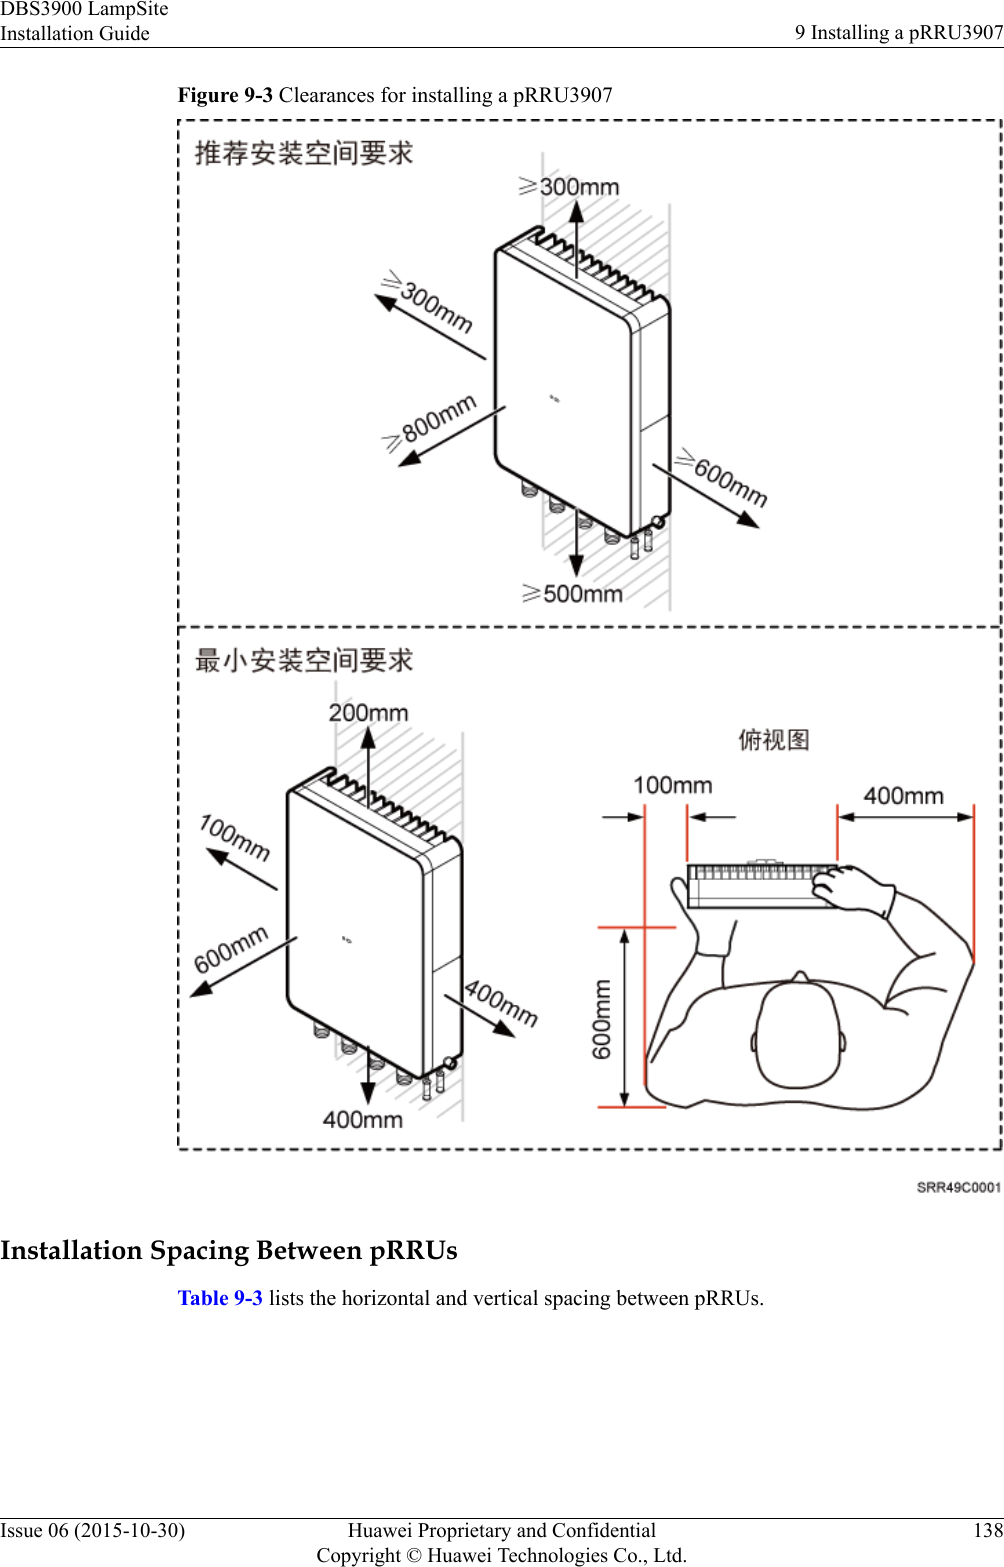 Figure 9-3 Clearances for installing a pRRU3907Installation Spacing Between pRRUsTable 9-3 lists the horizontal and vertical spacing between pRRUs.DBS3900 LampSiteInstallation Guide 9 Installing a pRRU3907Issue 06 (2015-10-30) Huawei Proprietary and ConfidentialCopyright © Huawei Technologies Co., Ltd.138